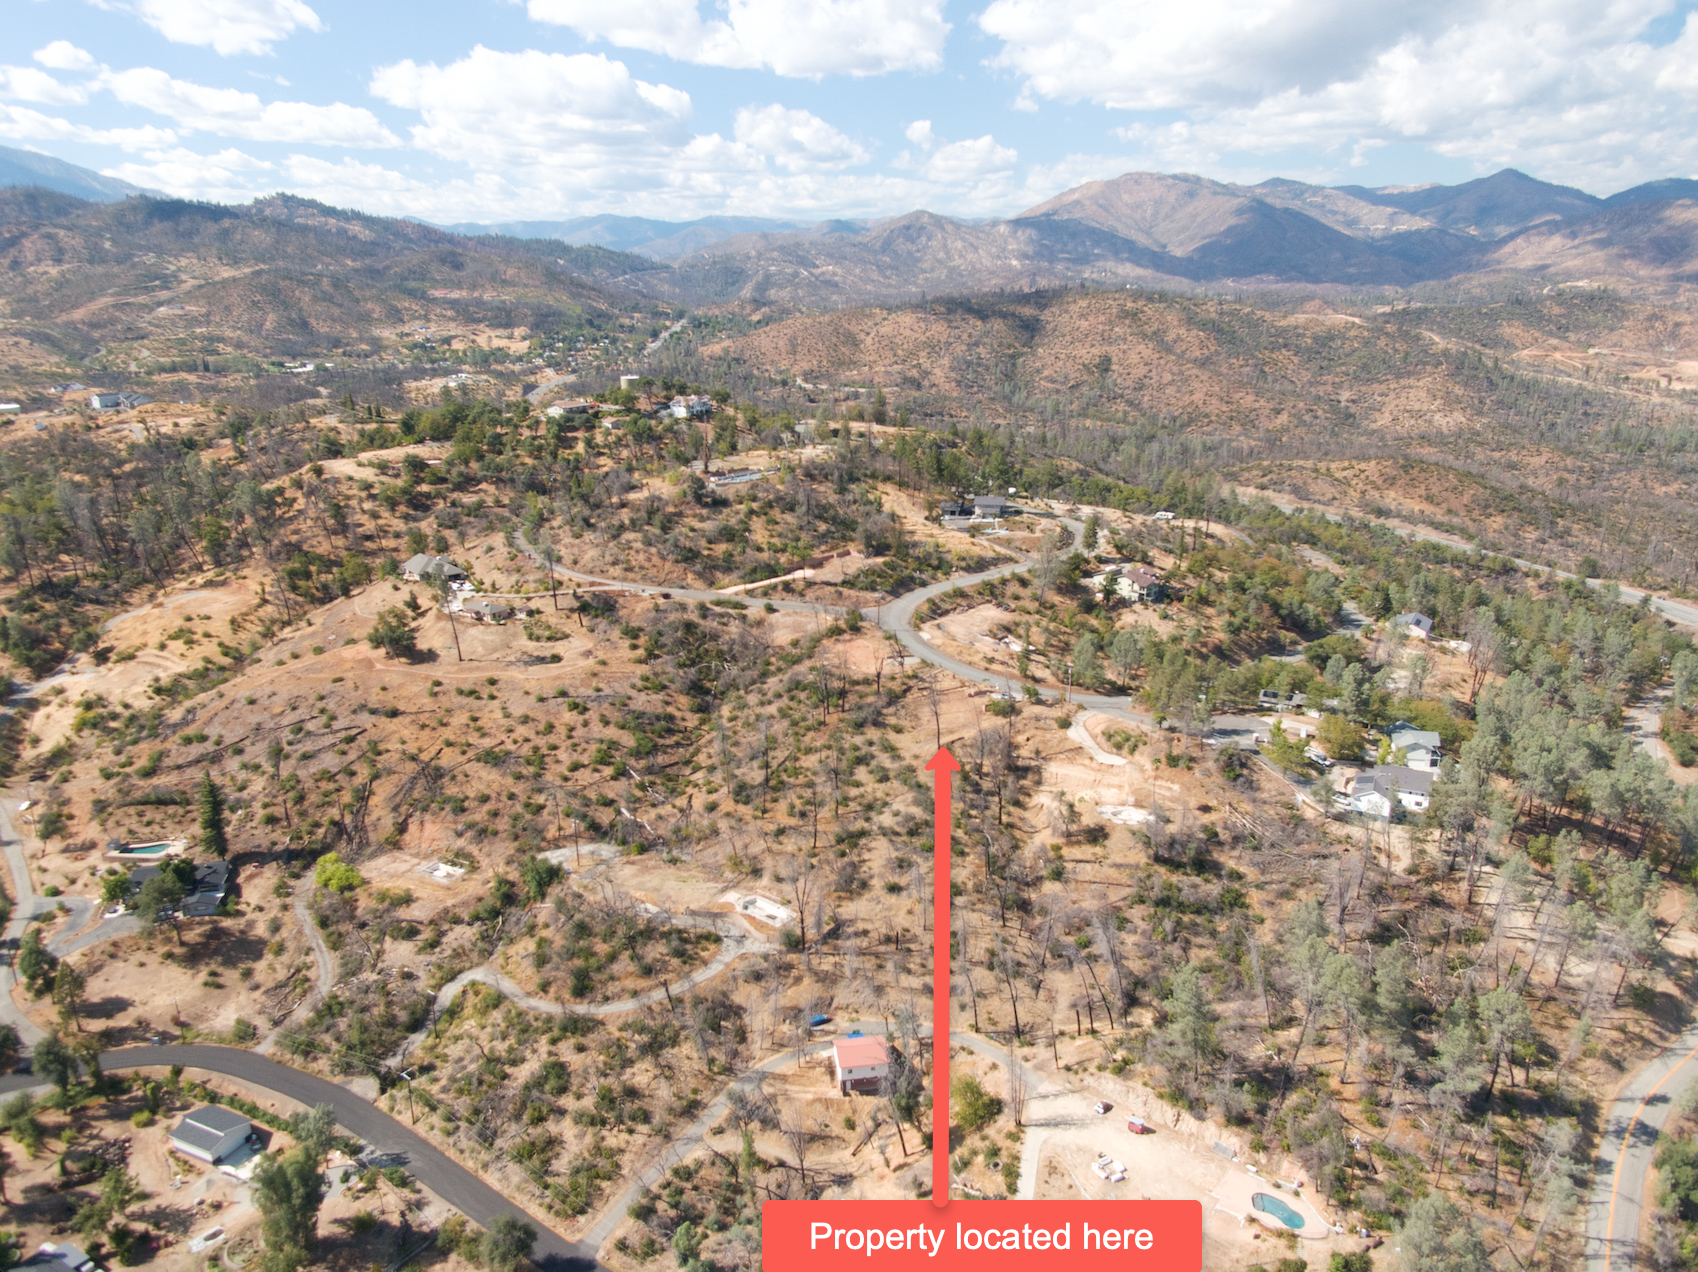 1.46 ACRE LOT WITH ALL UTILITIES READY - 4 MILES FROM DOWTOWN REDDING, CA - SIMILAR LOTS ON THE SAME STREET SELLING FOR $85,000+ - LOT IS AVAILABLE FOR $65,000 FINANCED WITH $8,000 DOWN OR $58,000 CASH